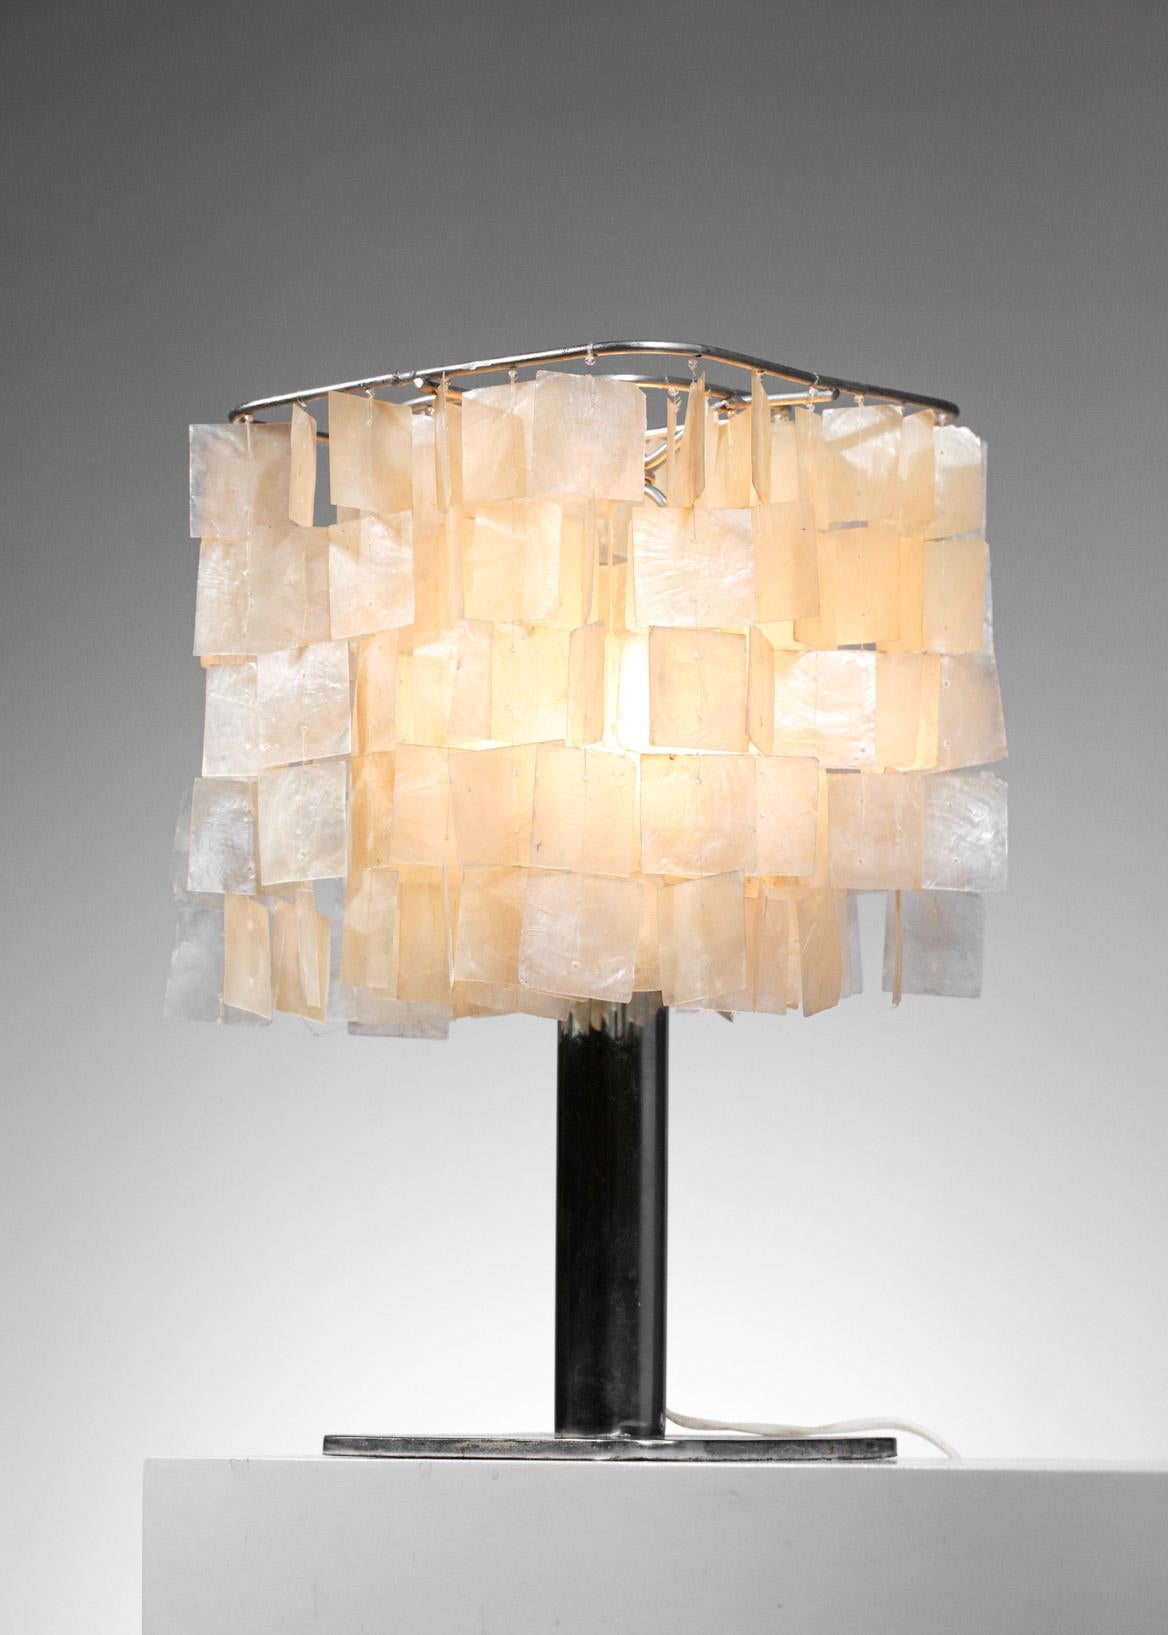 Unique Handmade Table Lamp in Mother of Pearl 70s Style Verner Panton G220 For Sale 3